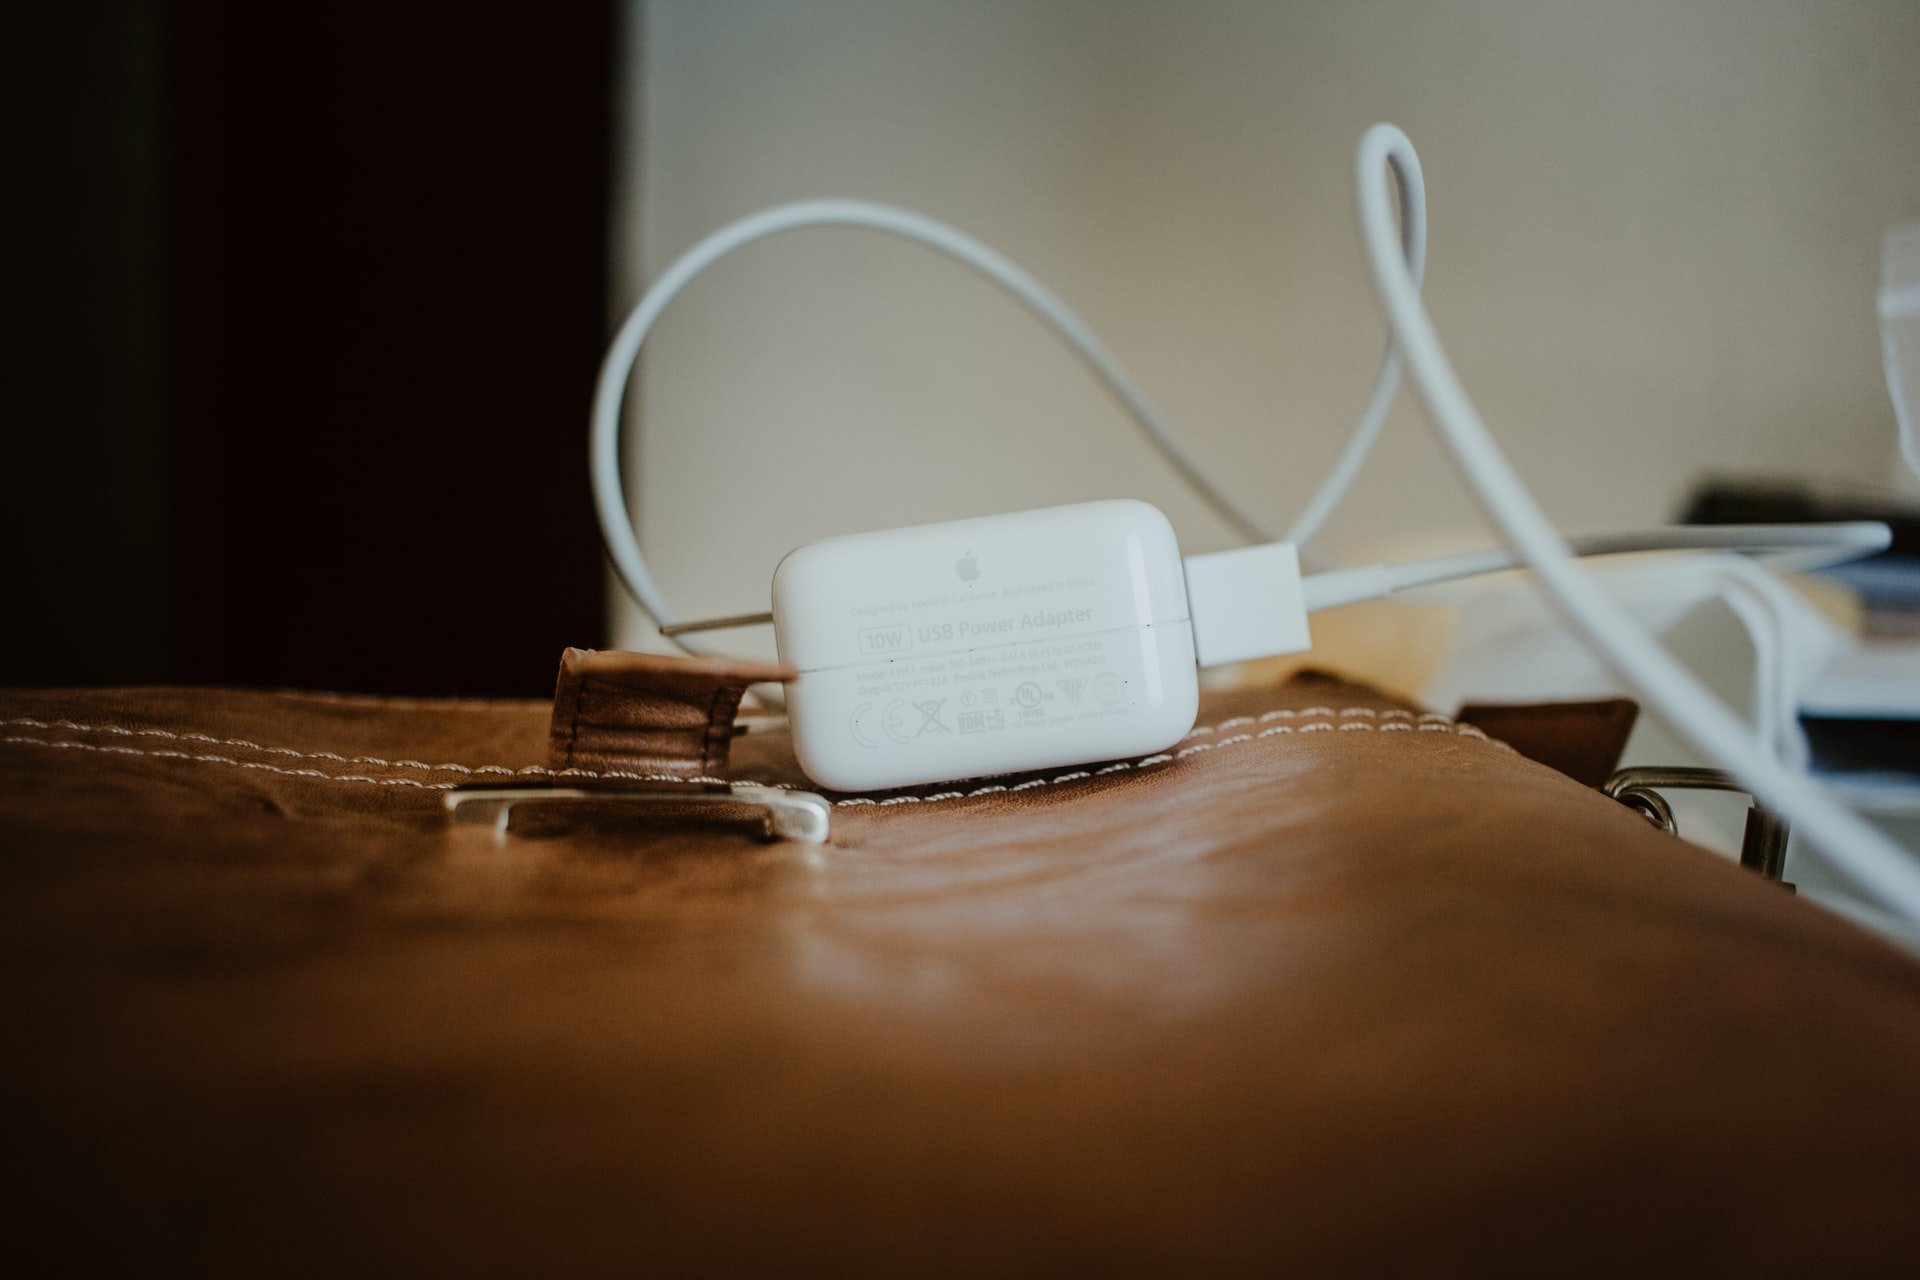 He bought a charger with a hidden camera. | Source: Unsplash